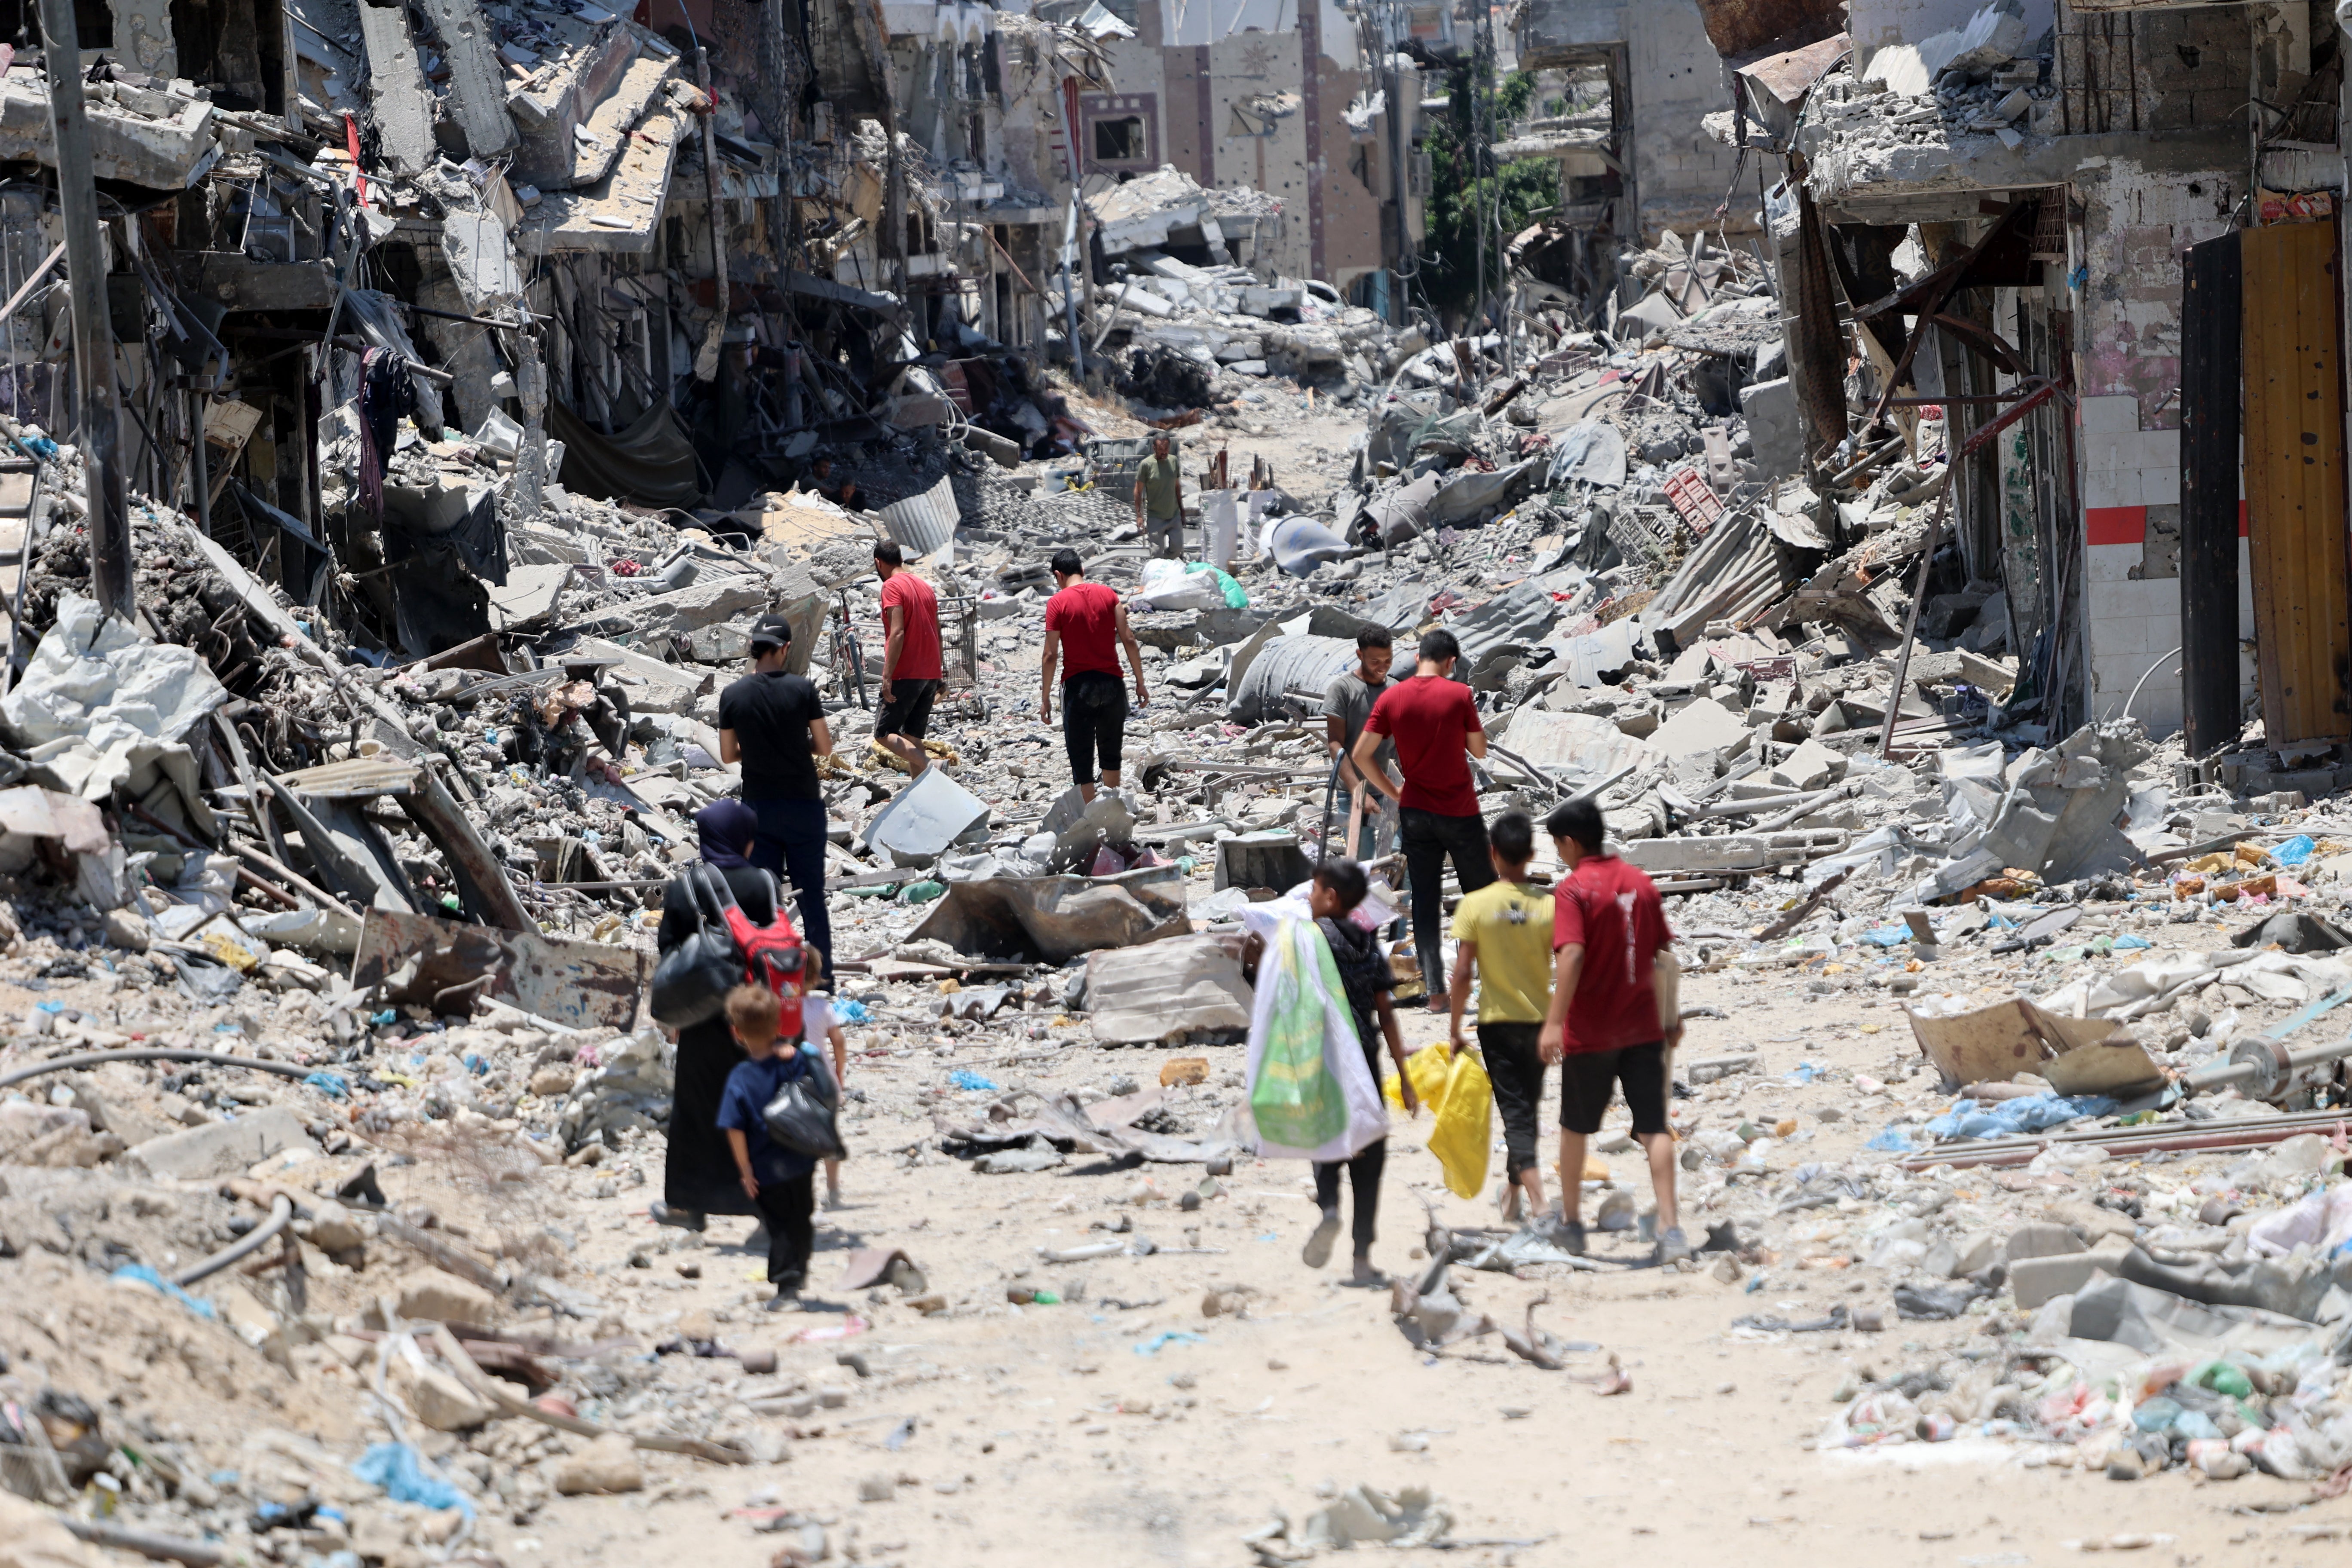 Palestinian men, a woman and children, make their way over rubble